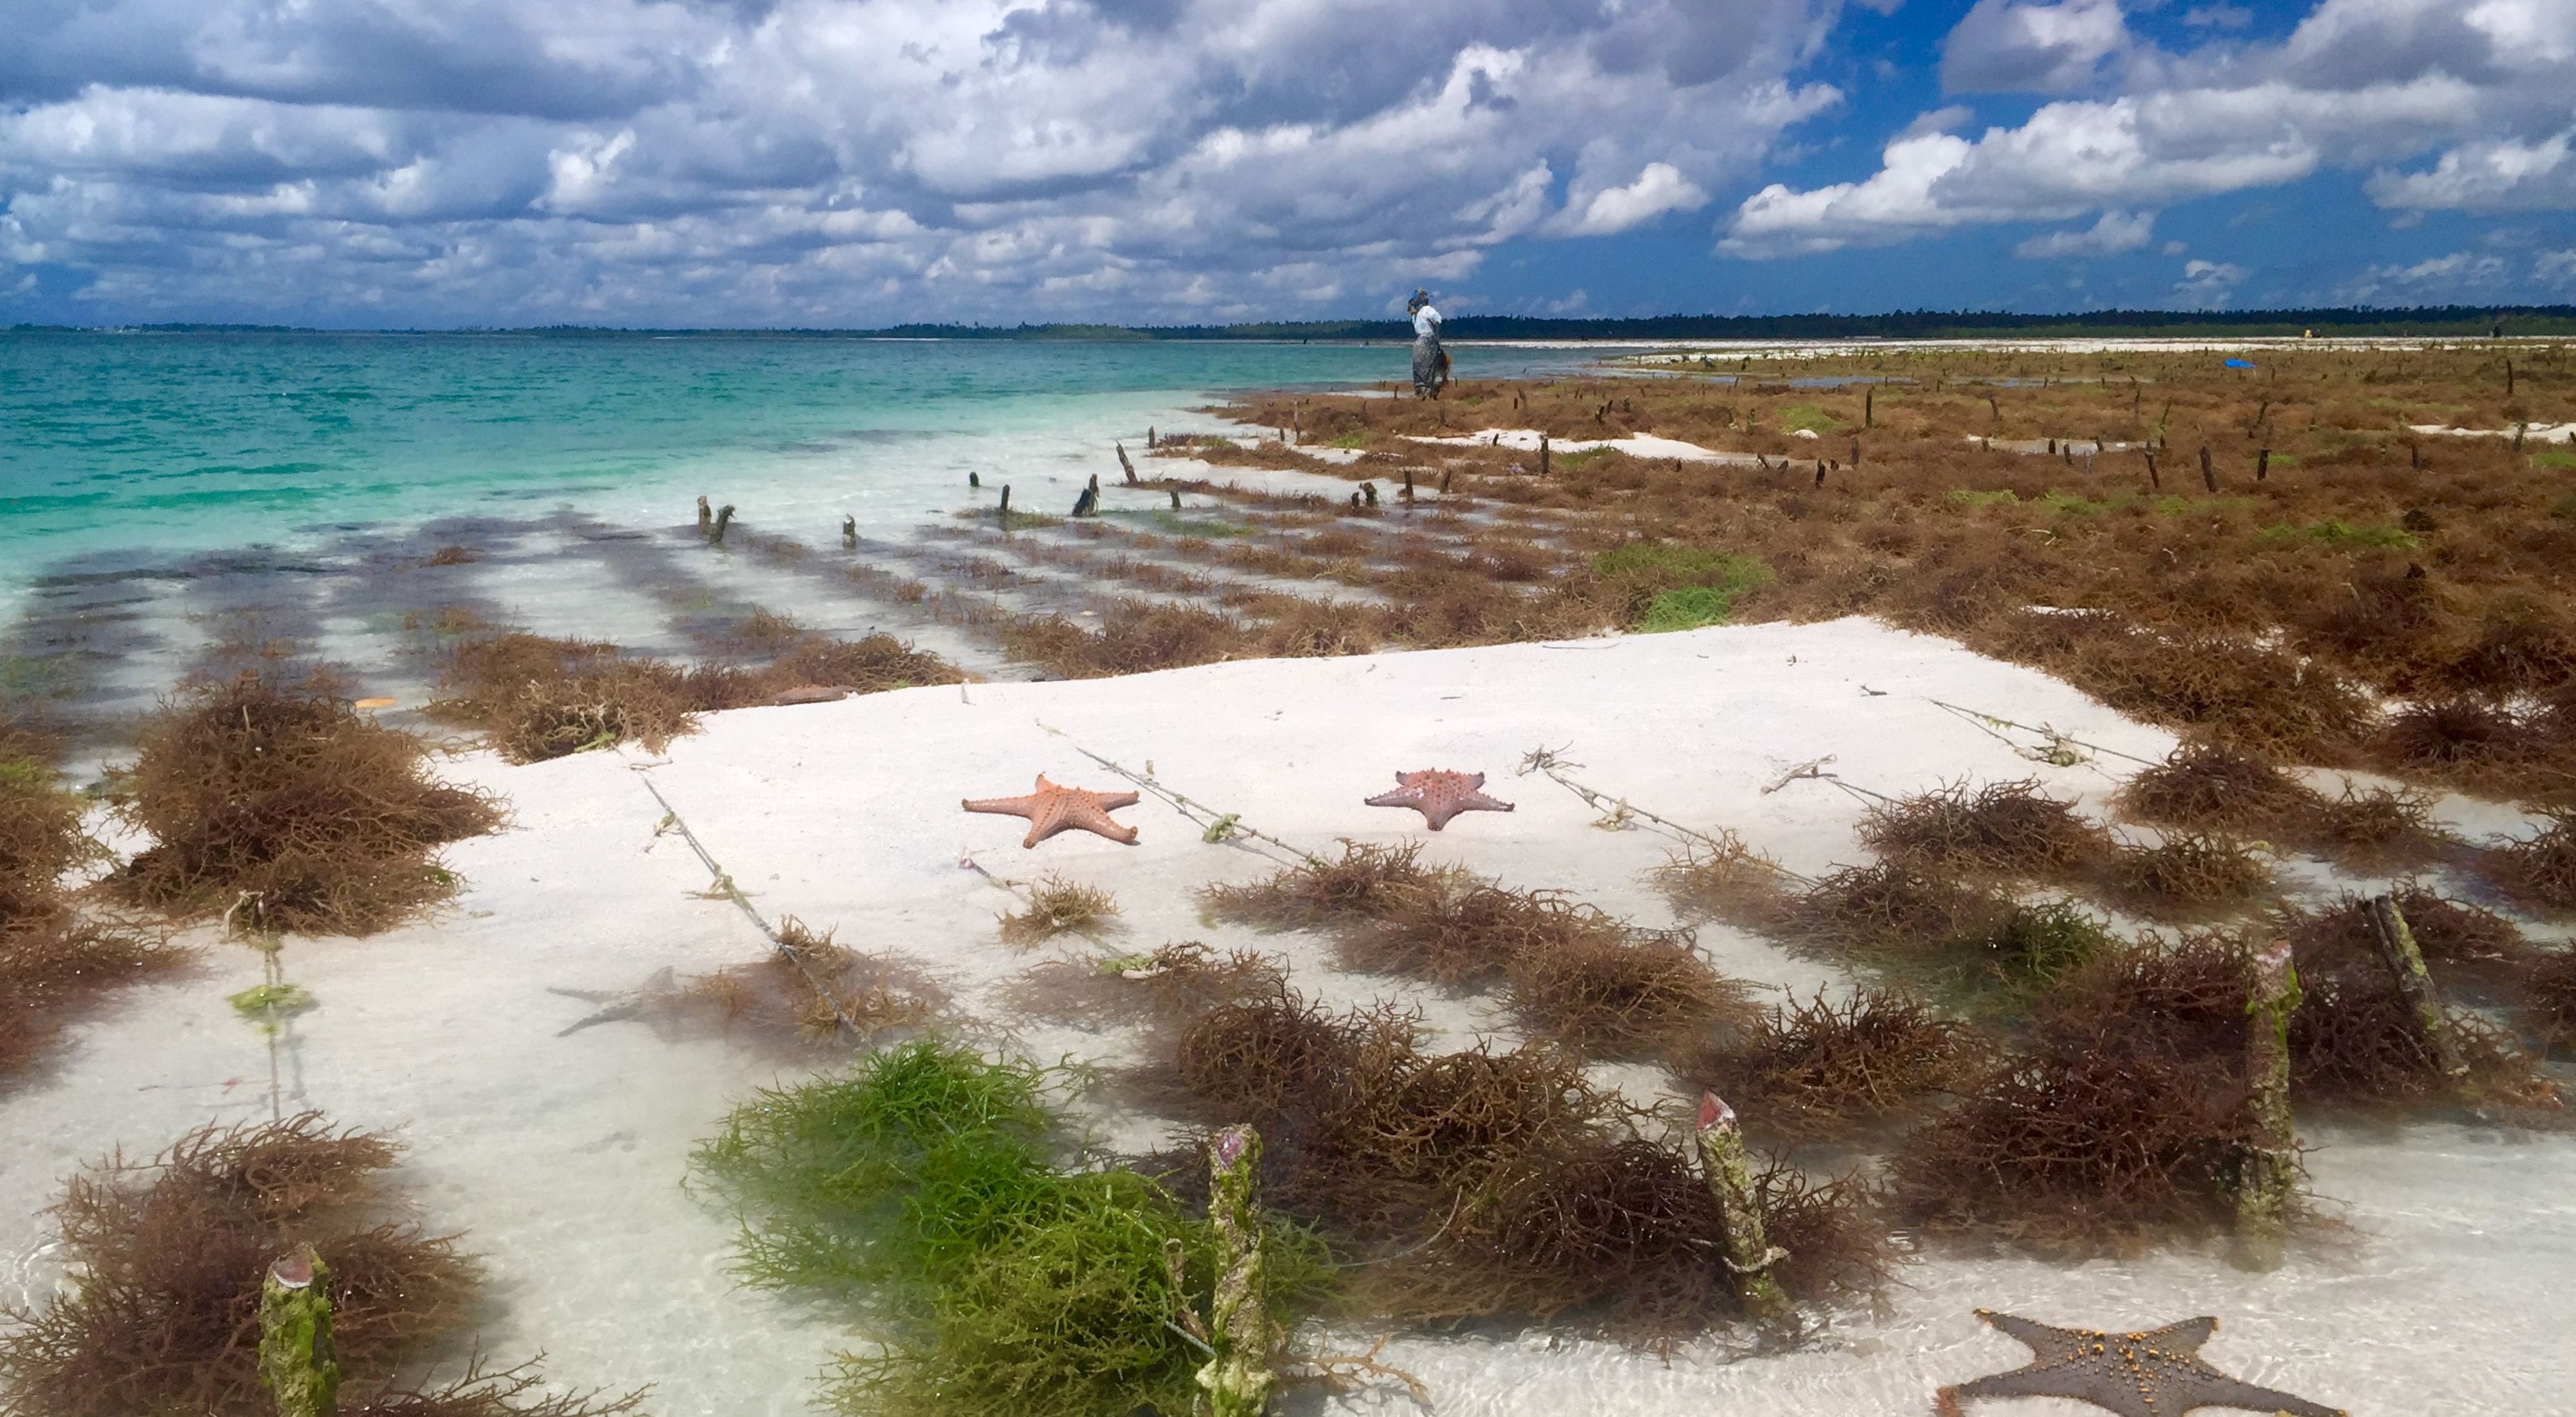 Spinosum farm and neighbouring sea stars exposed during low tide in Mjini Kiuyu – North Pemba